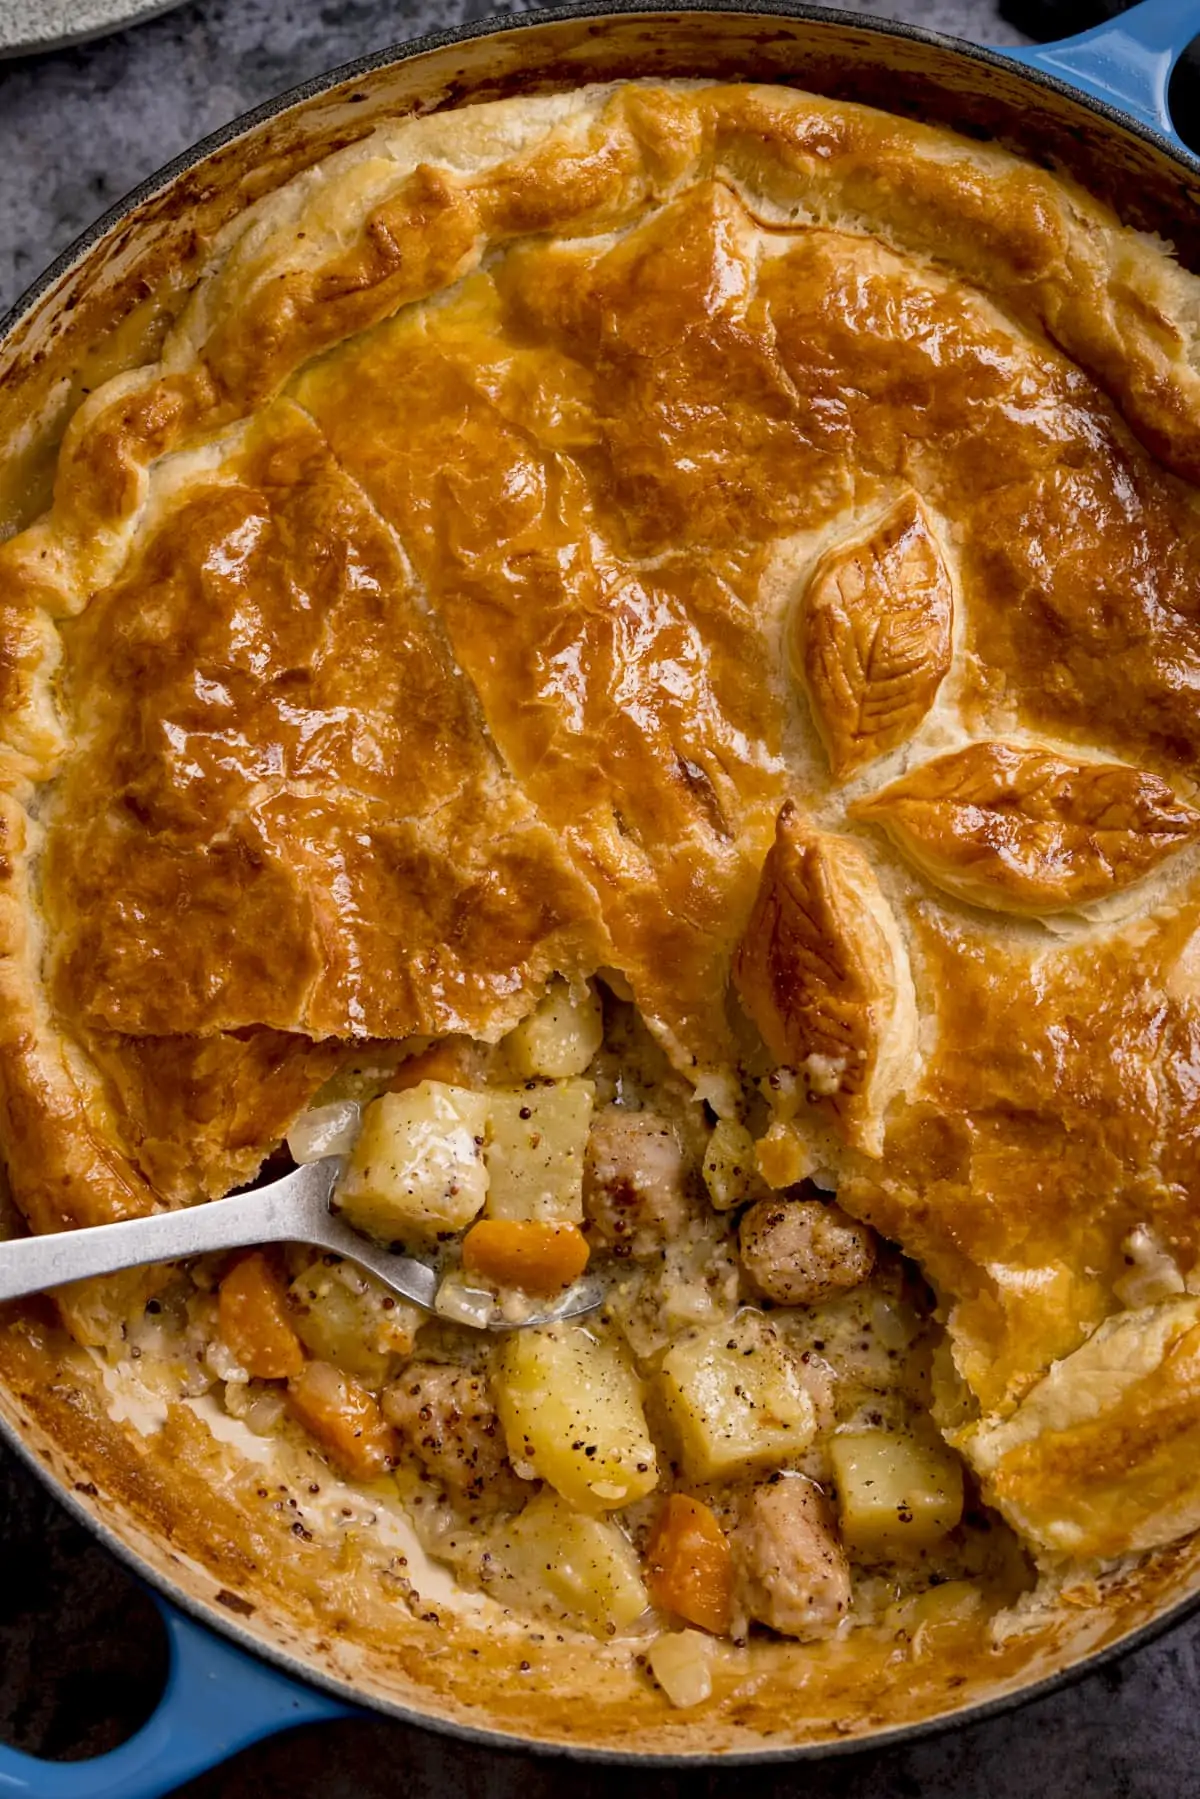 Tall overhead image of a sausage and mustard pie with some of the pastry lid removed. There is a spoonful being taken from the pie.